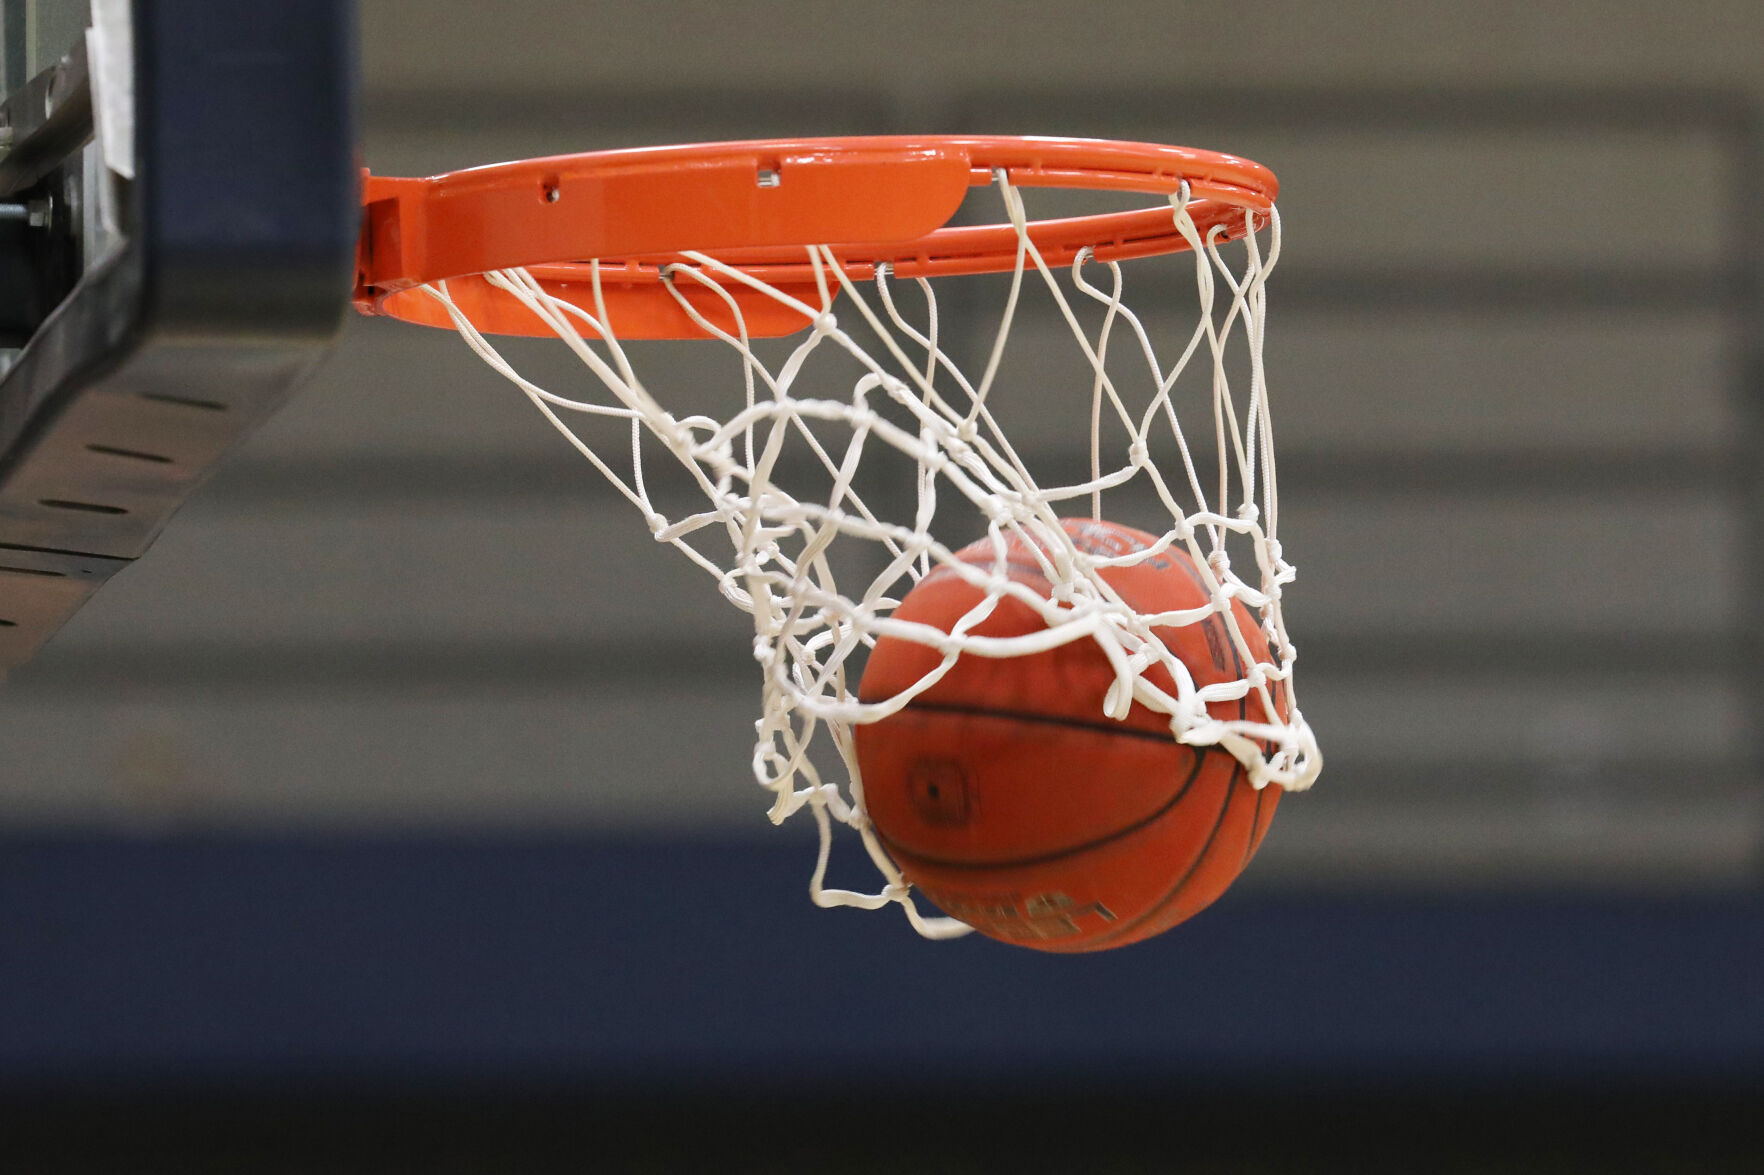 North Scott Leads MAC Standings with 7-0 Record, Pleasant Valley Defeats Central DeWitt 55-38, Davenport West Secures 77-58 Victory over Muscatine